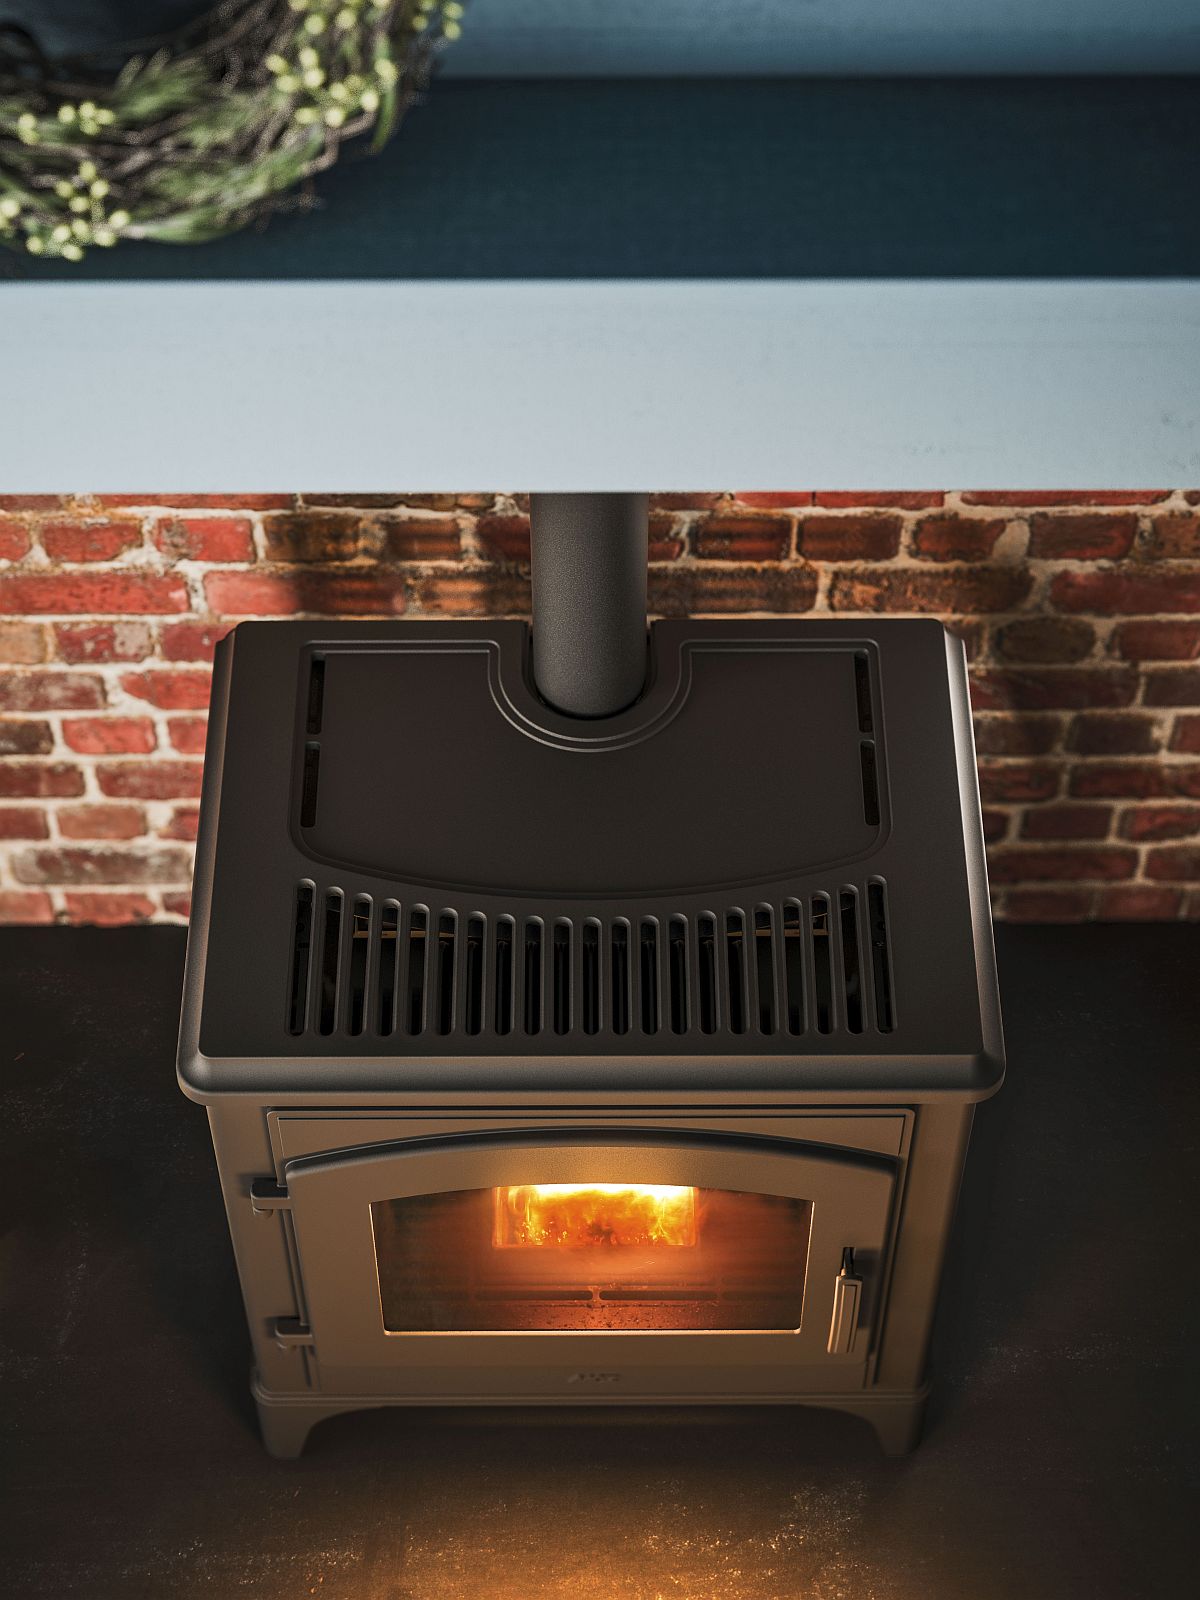 Traditiional British design fused with contemporary functionality by Deco pellet stove